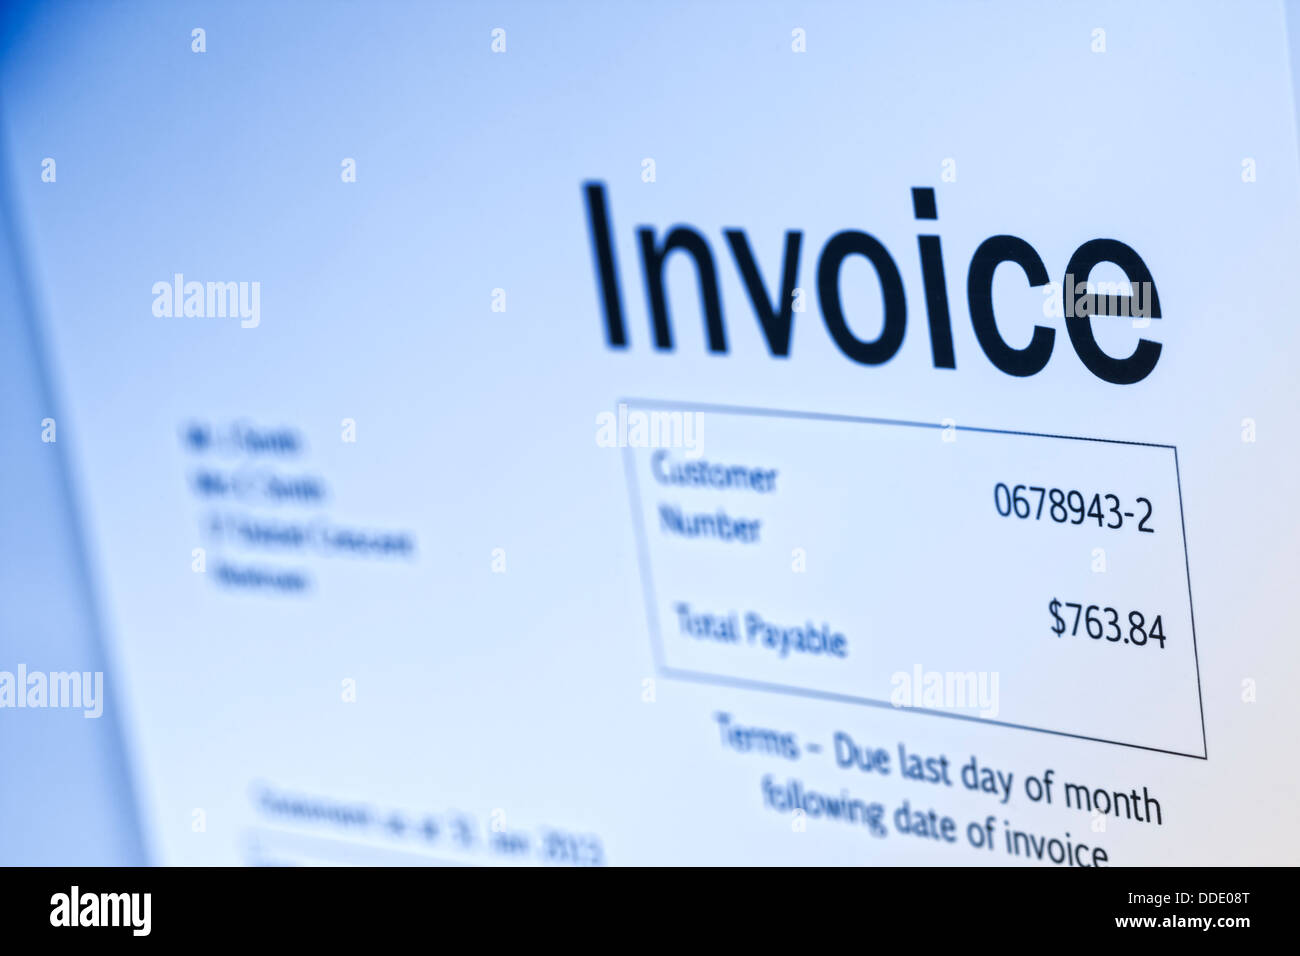 Invoice, shallow DOF, blue toned. All details are imaginary. Stock Photo